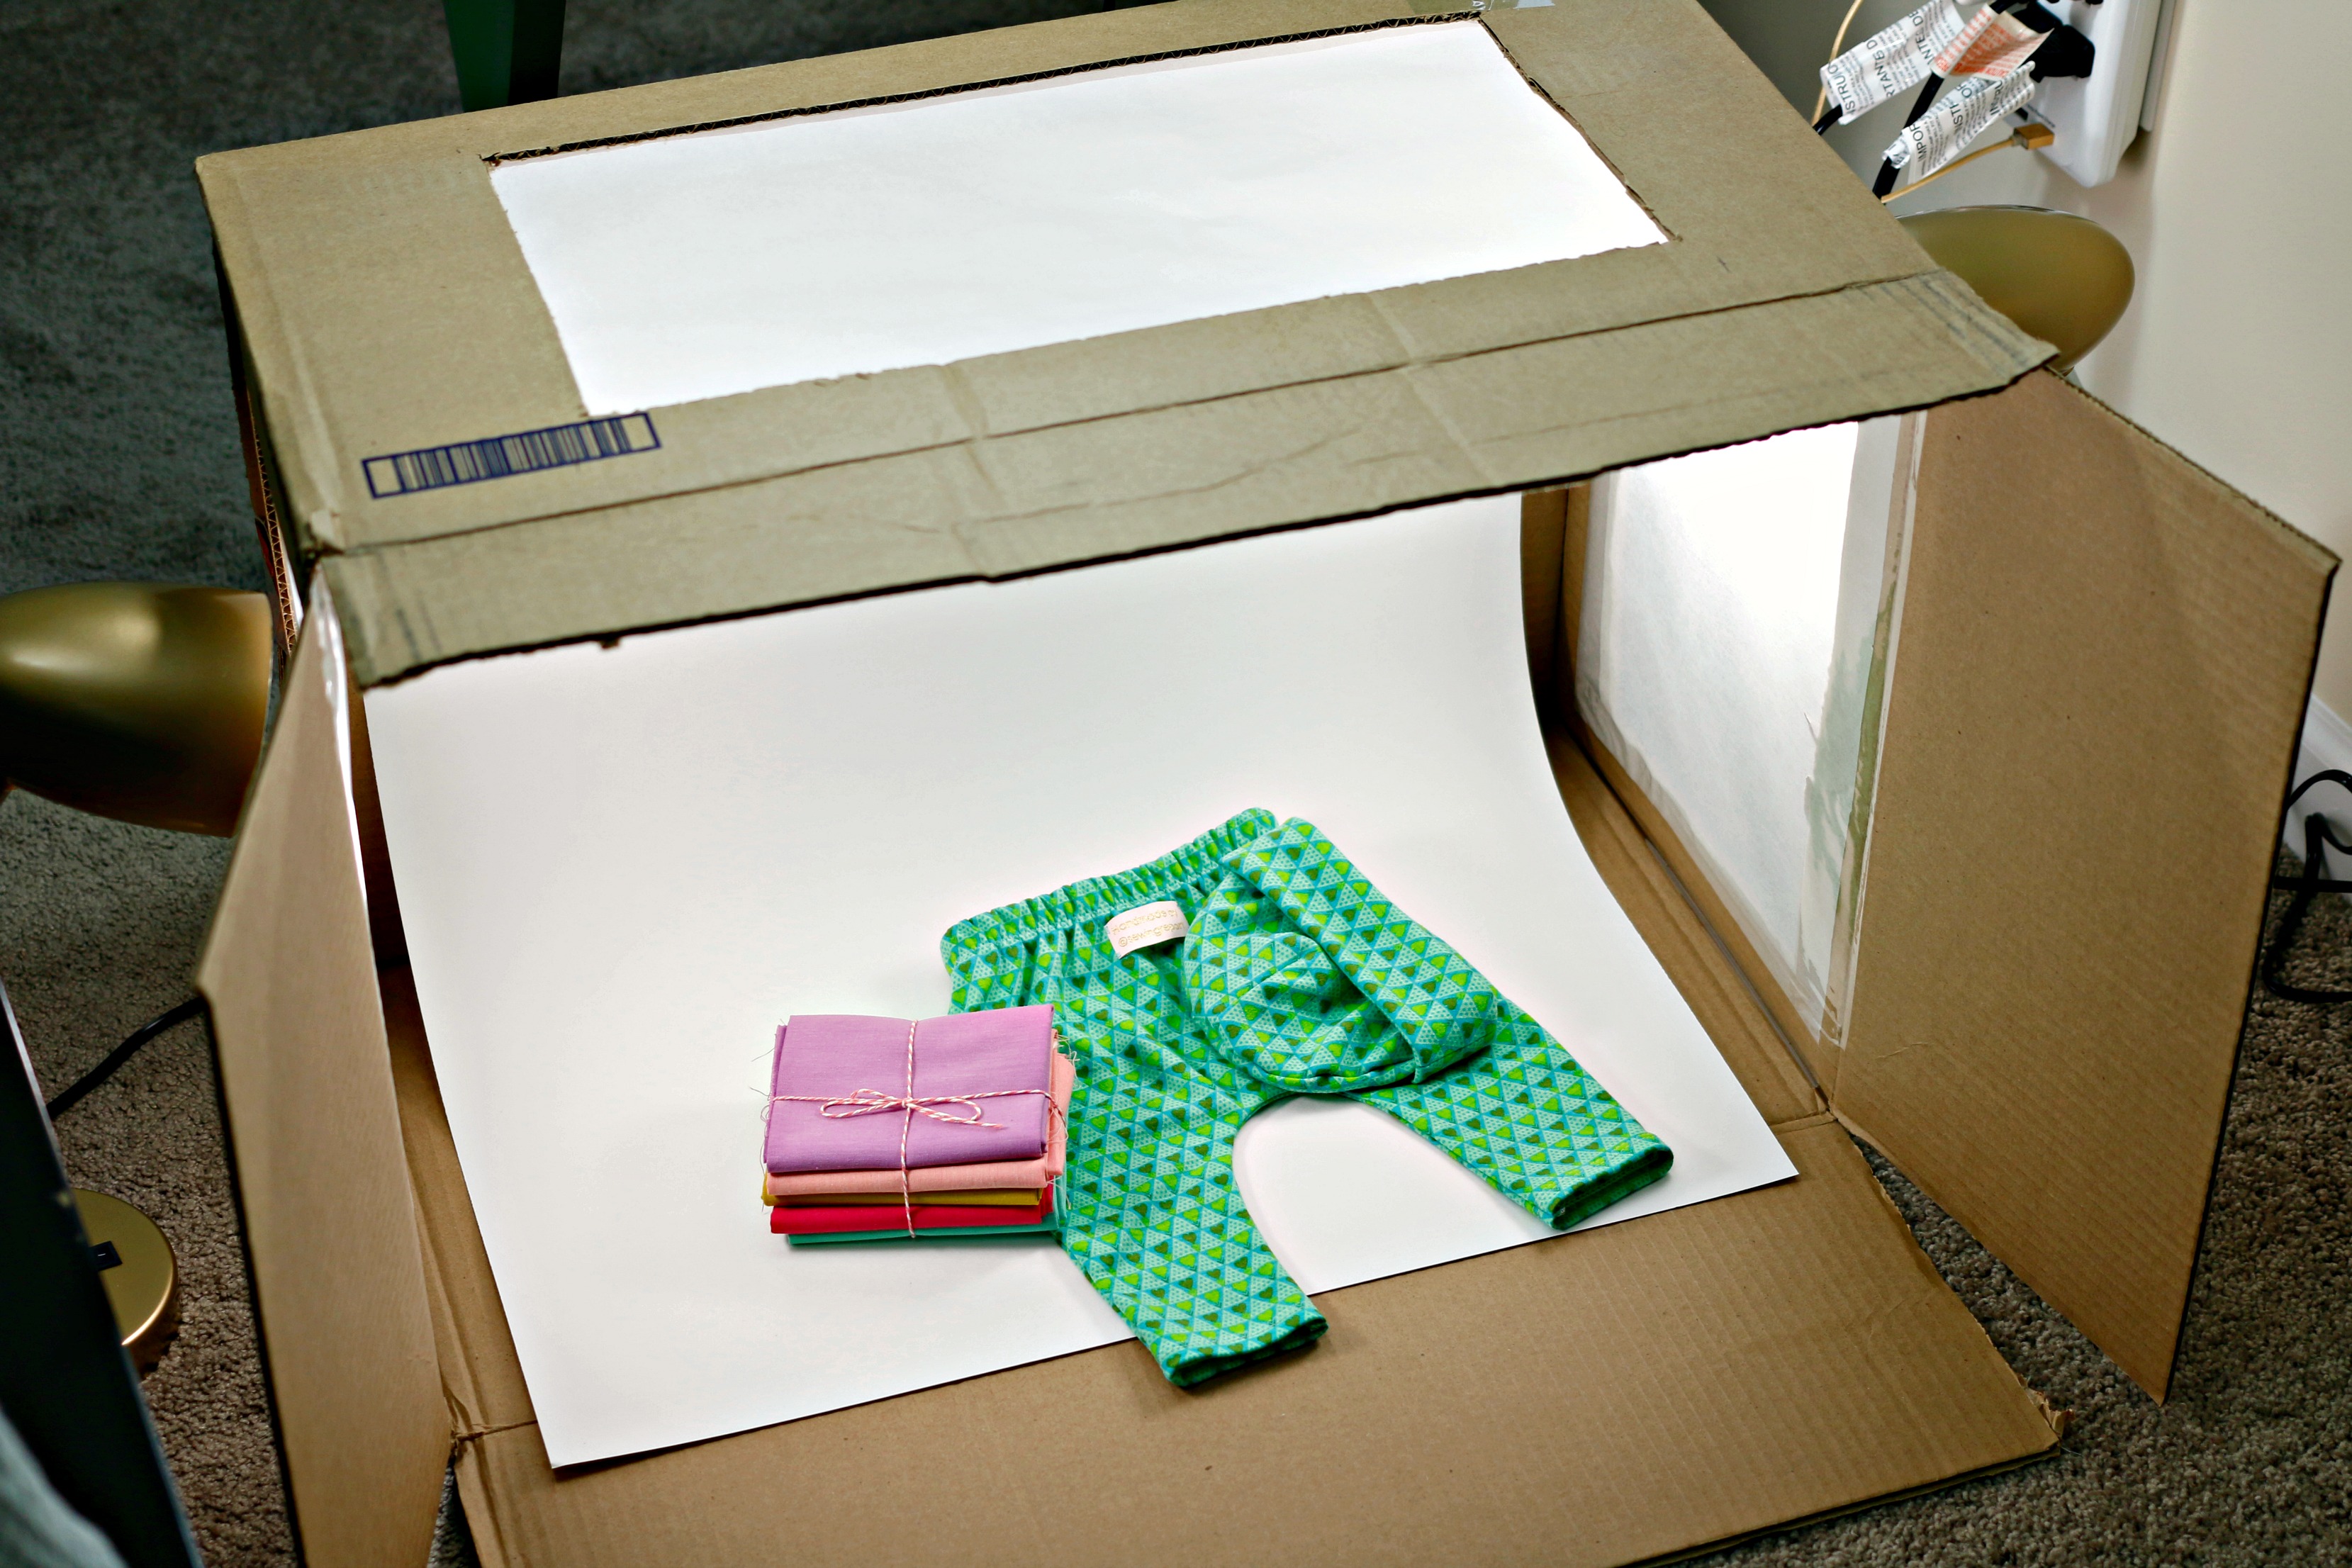 DIY Photography Light Box from a Cardboard LED Desk Lamps – Sewing Report